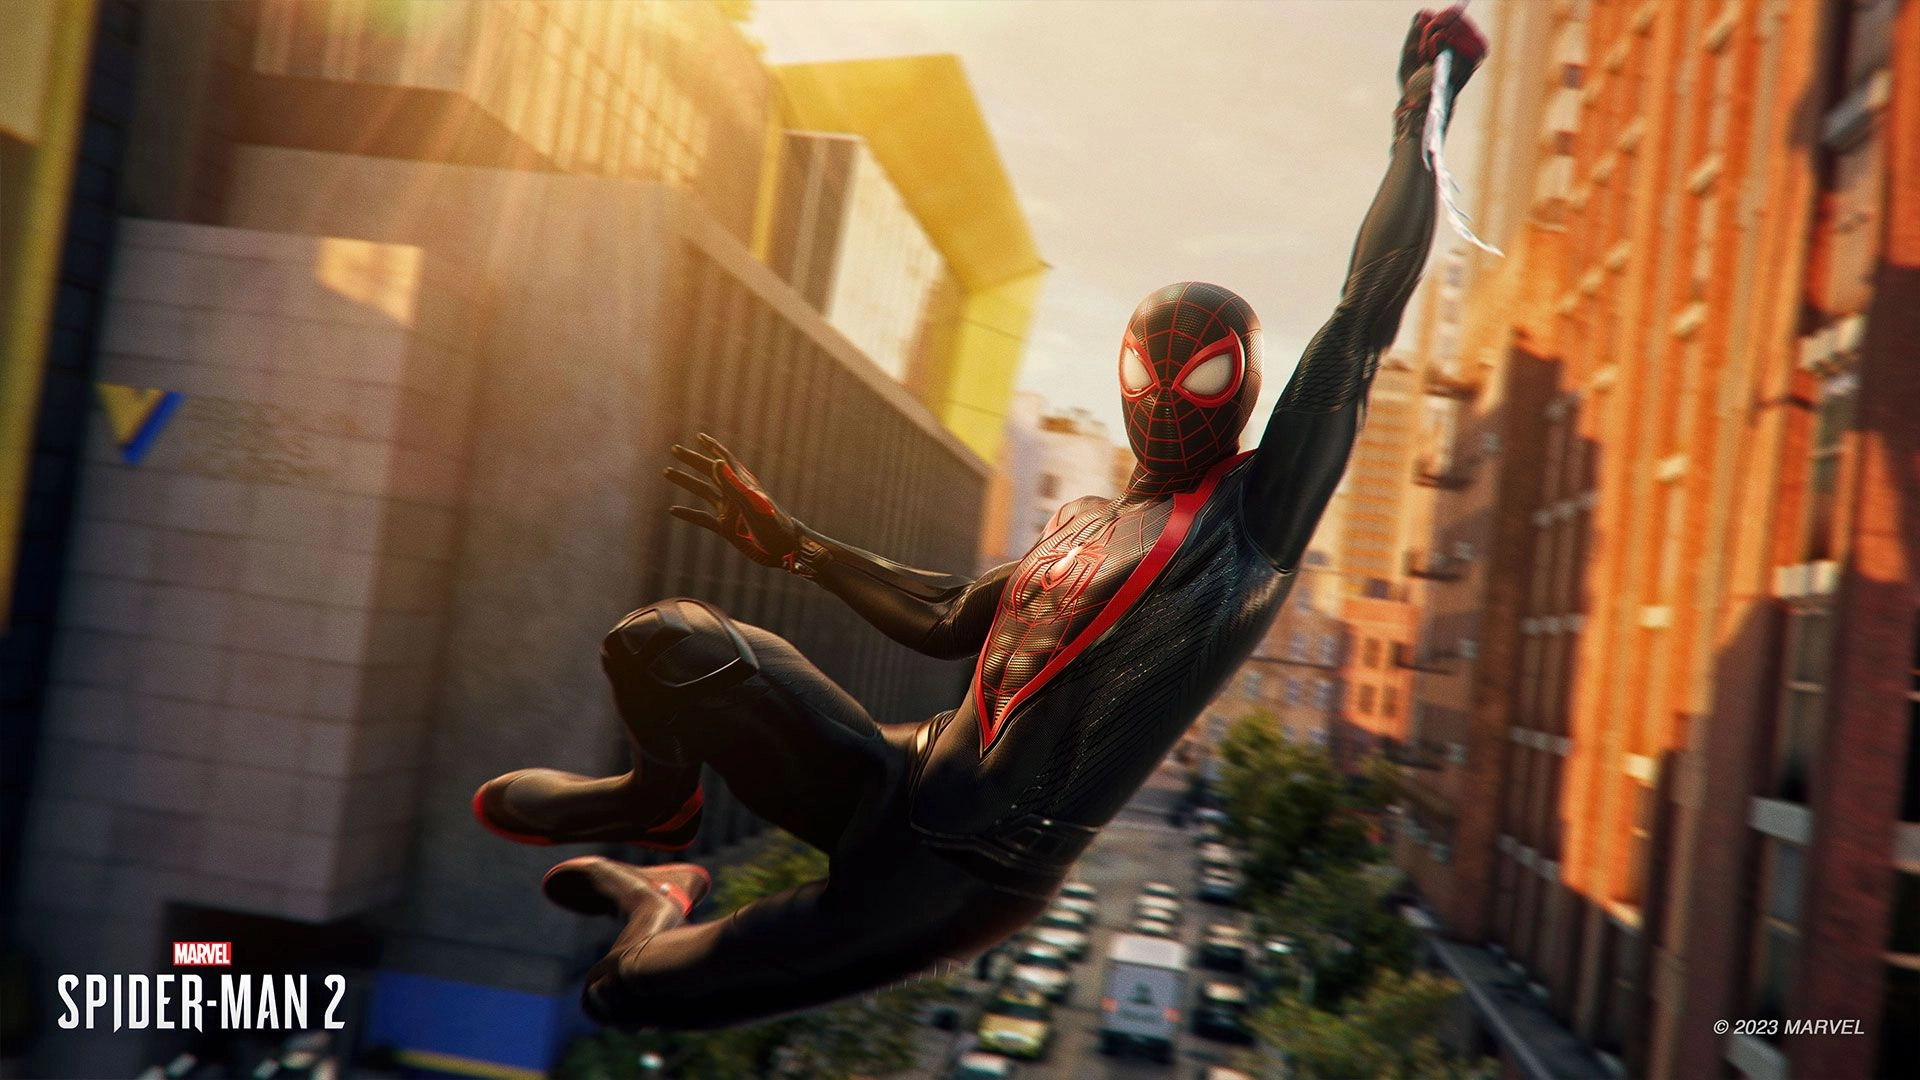 Spider-Man 2's Fast Travel: A Marvel in Gaming Technology